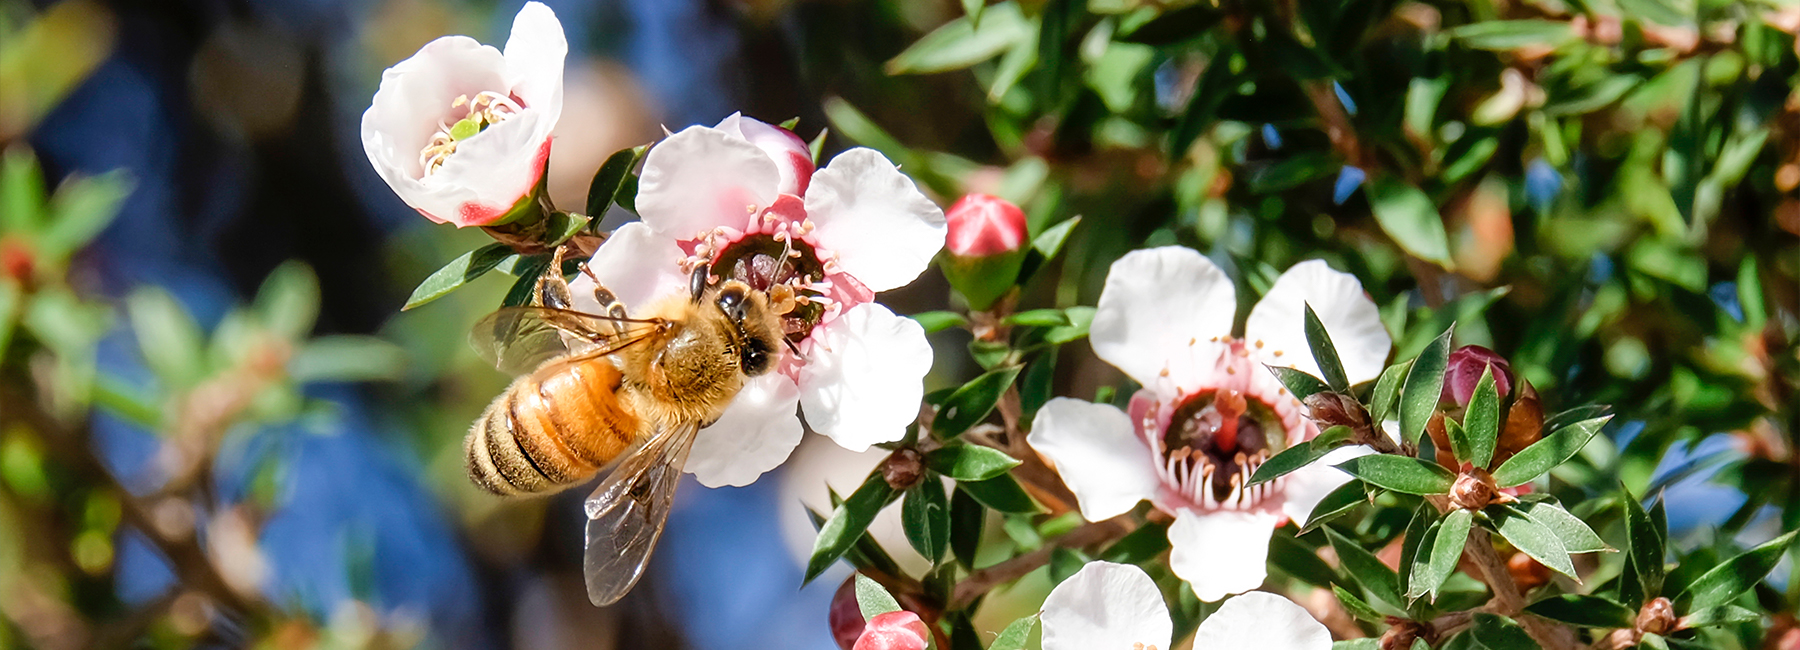 Manuka Health’s financial planning process is “the bee’s knees” with Oracle® EPM